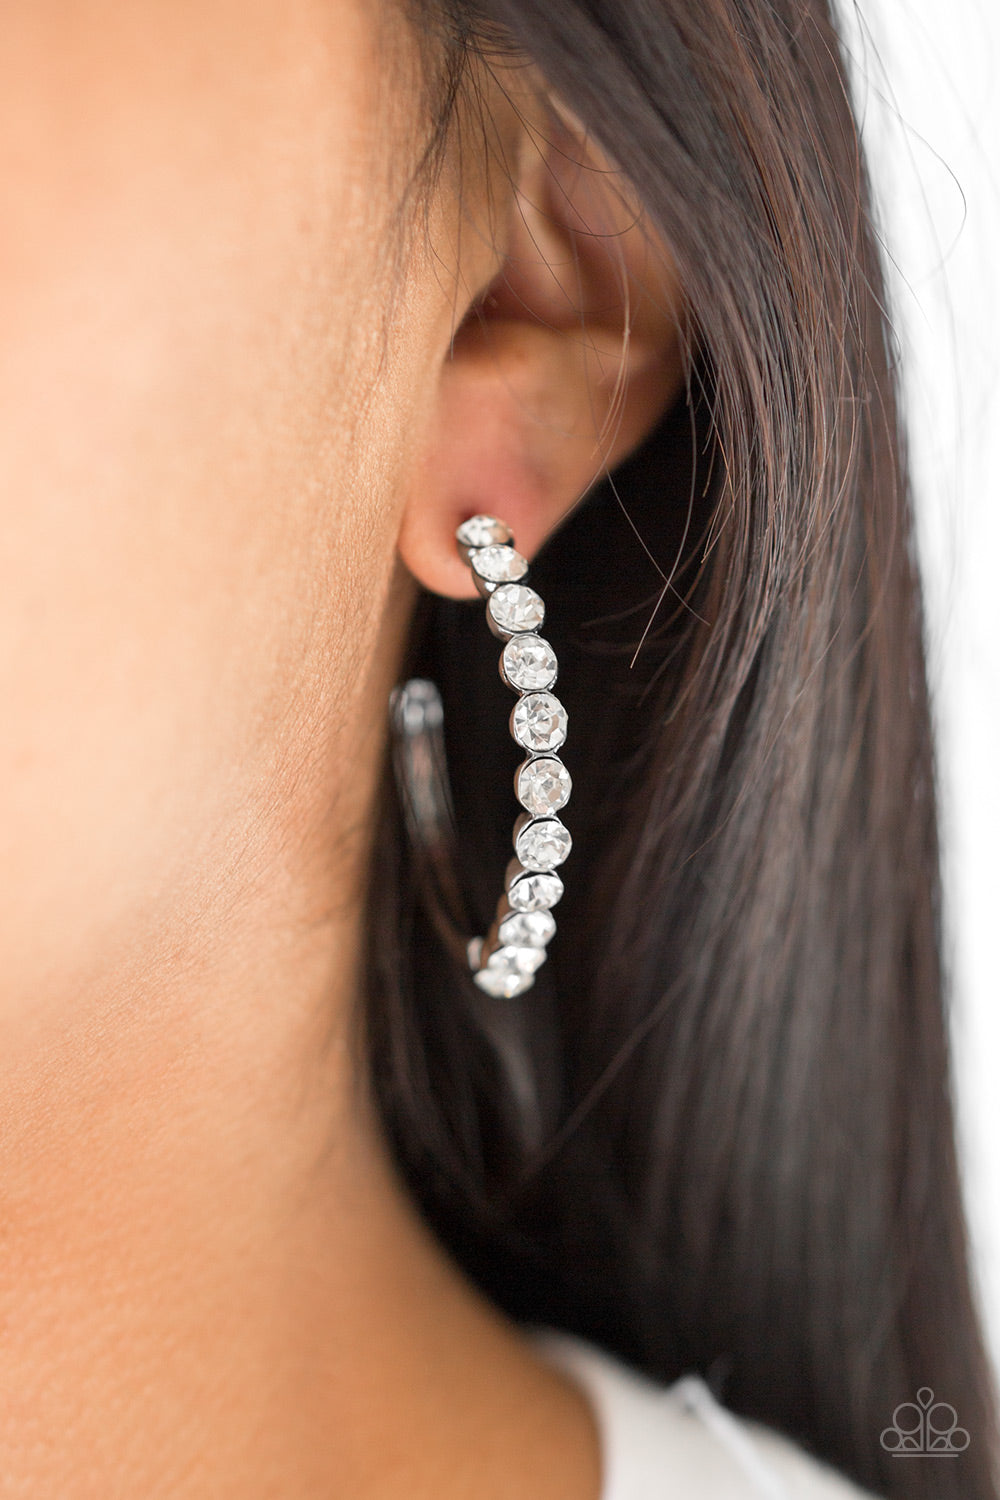 Paparazzi My Kind Of Shine - Black Earrings - A Finishing Touch 